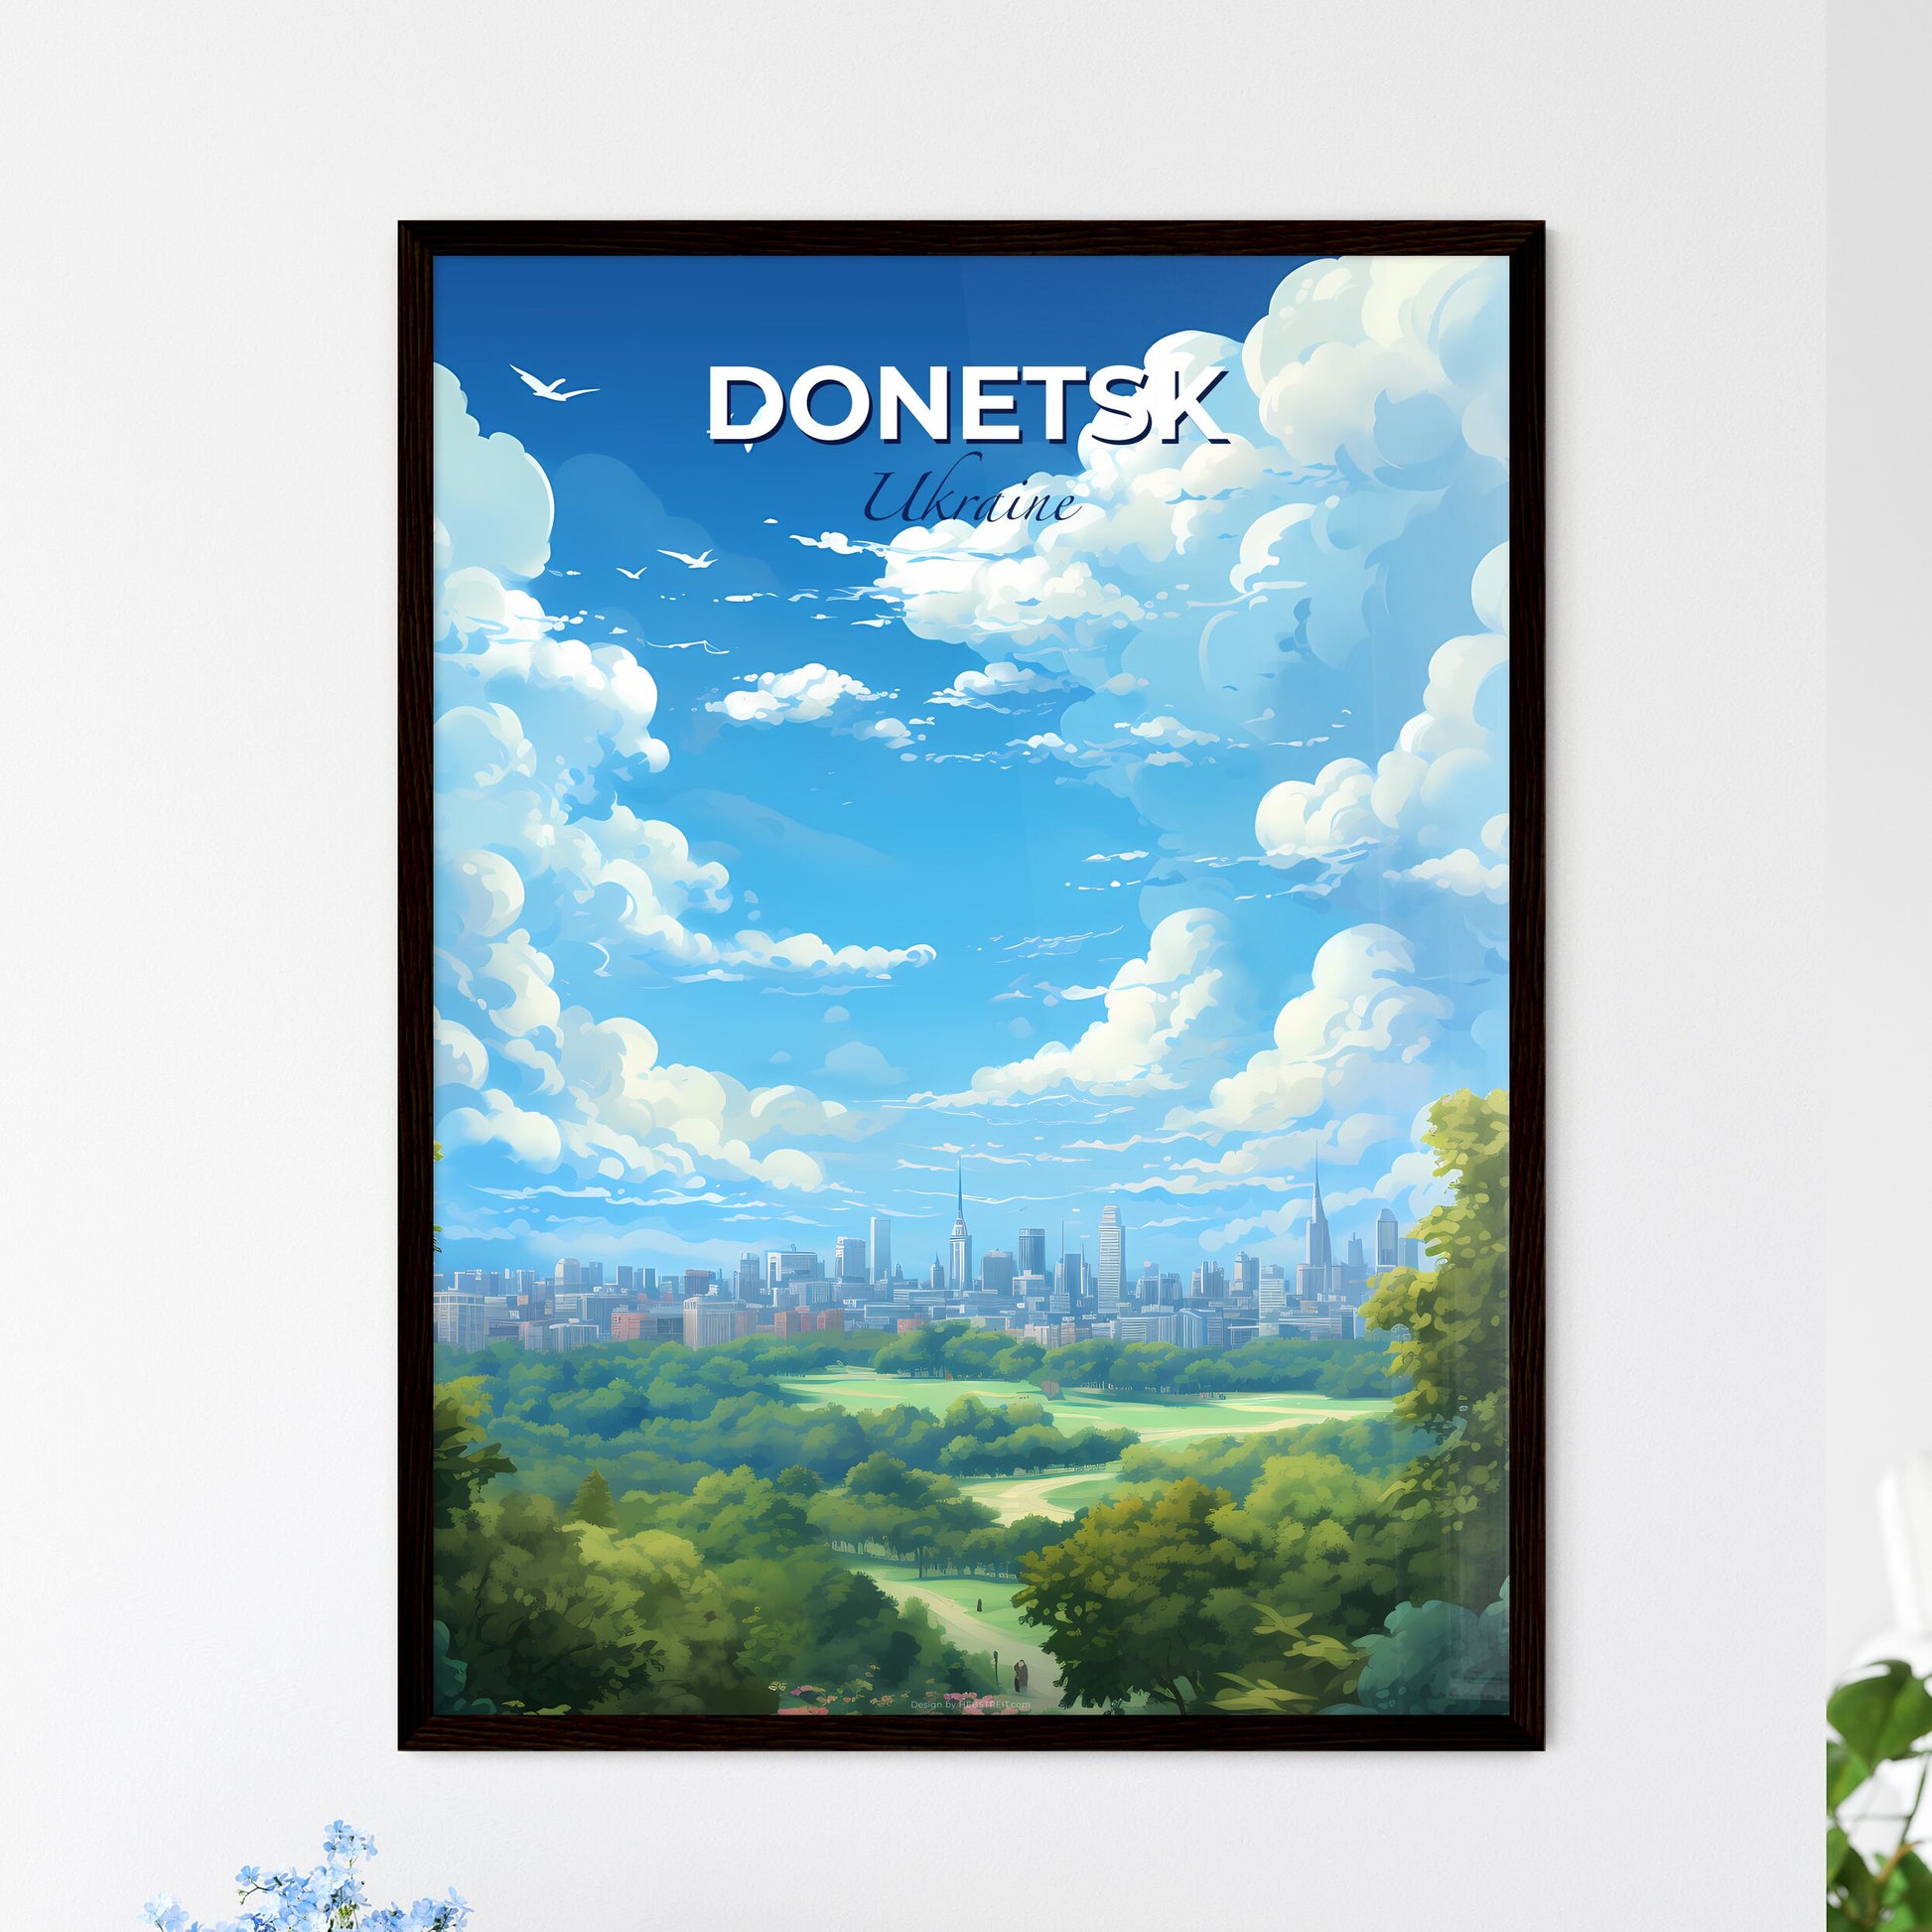 Donetsk Ukraine Skyline - A City Landscape With Trees And Clouds - Customizable Travel Gift Default Title